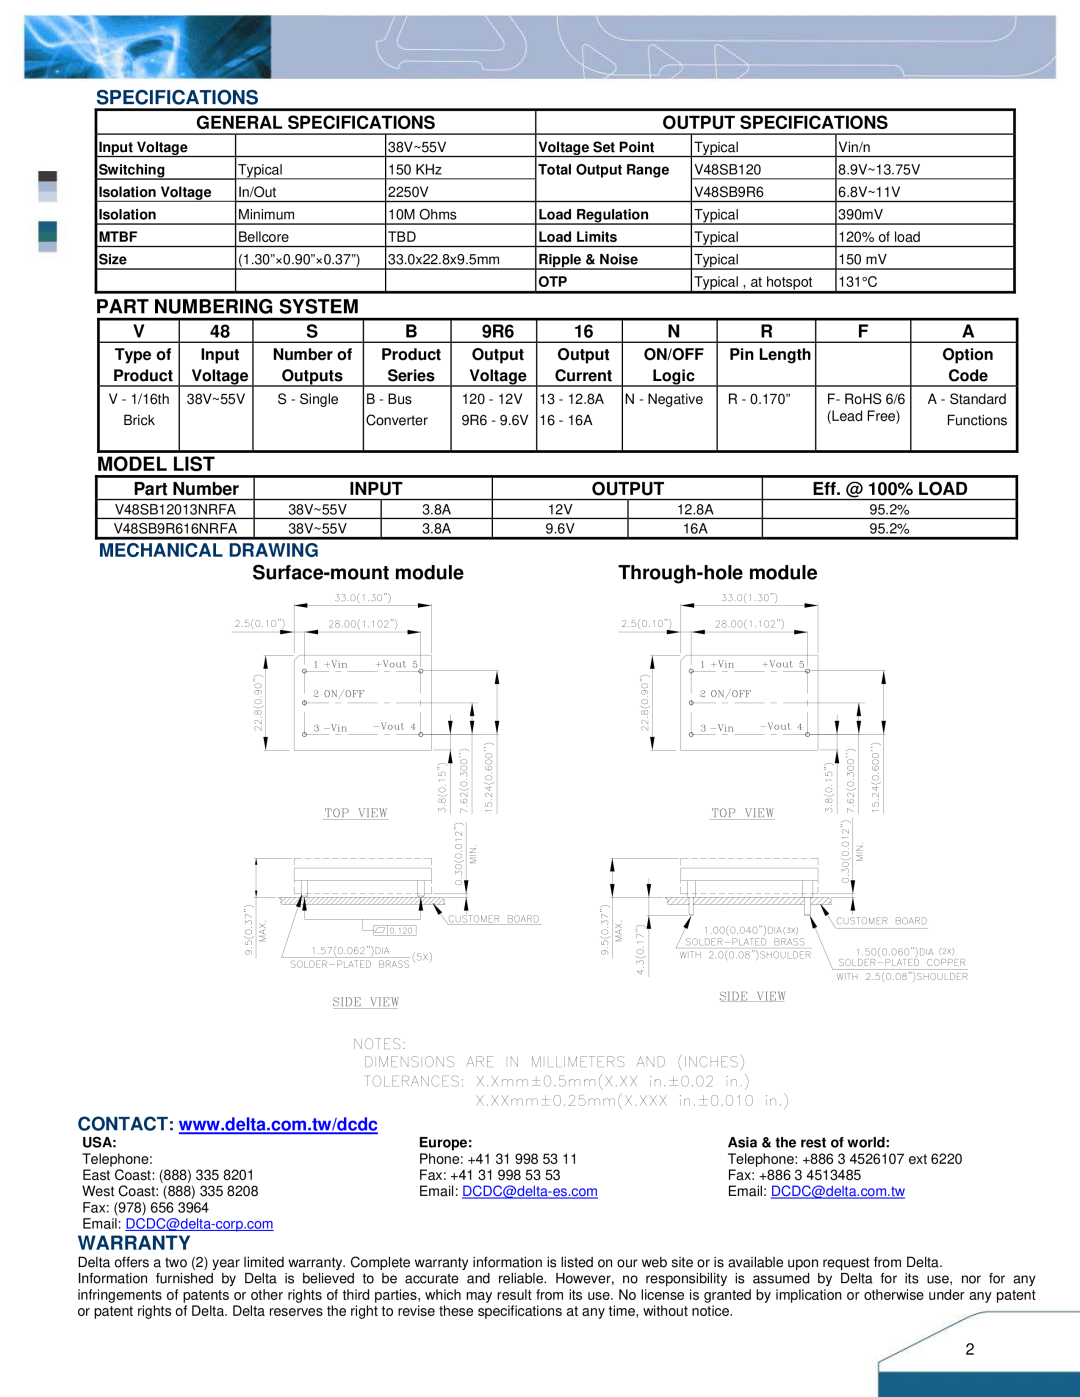 Delta Electronics Series V48SB Specifications, Warranty, Model List, Surface-mount module, Part Numbering System, Input 